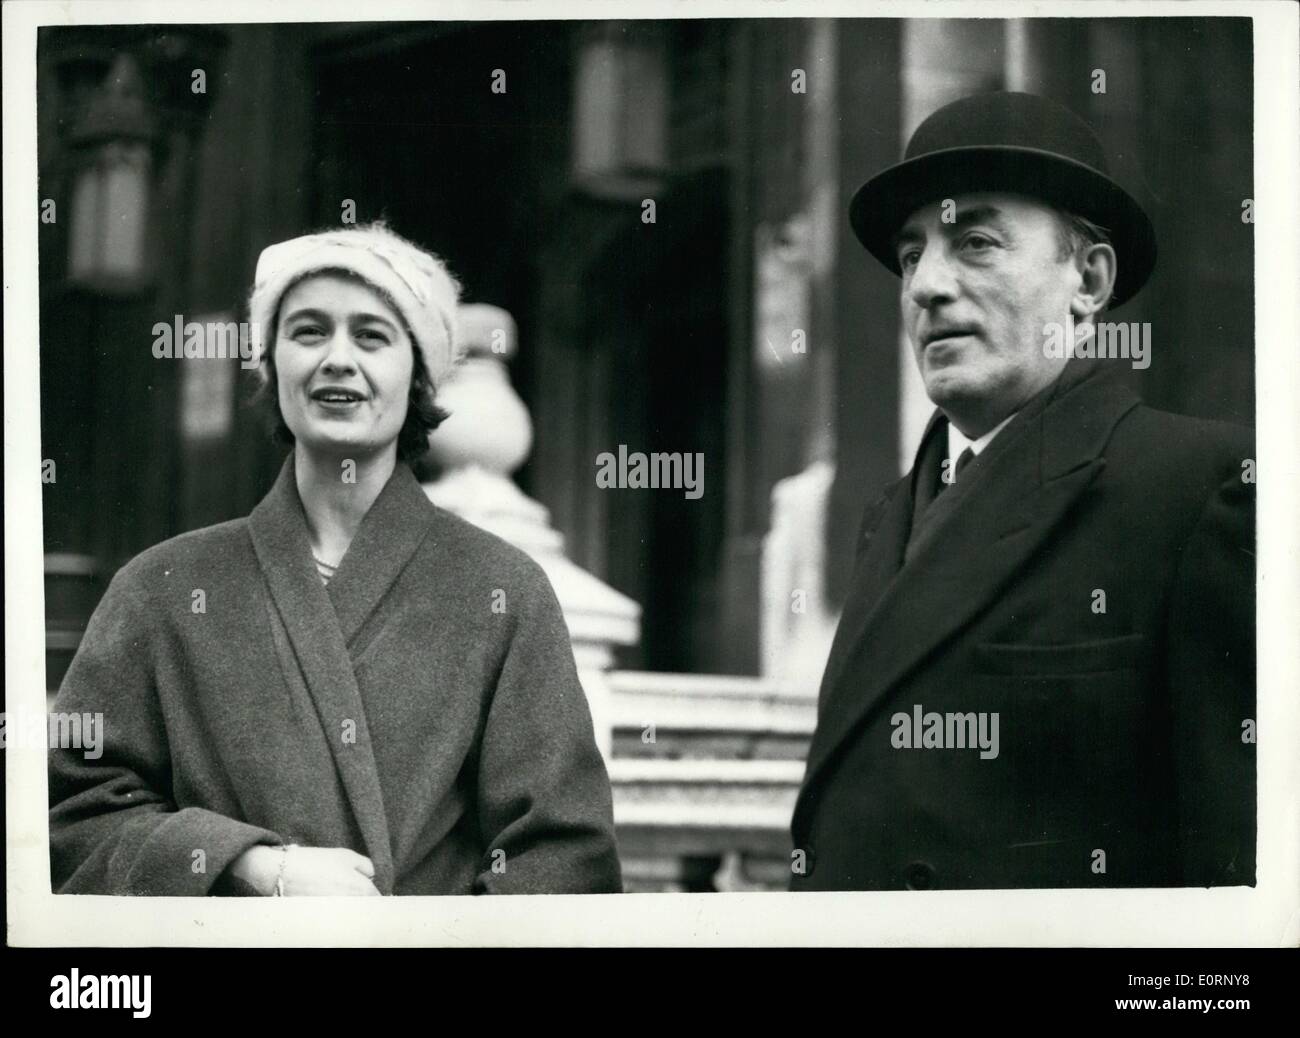 Feb. 02, 1960 - Millionaire sued by daughter for dowry. Unusual case at the London High Court.: Mrs. Fanny Sybil-Phrantzes 29 Stock Photo